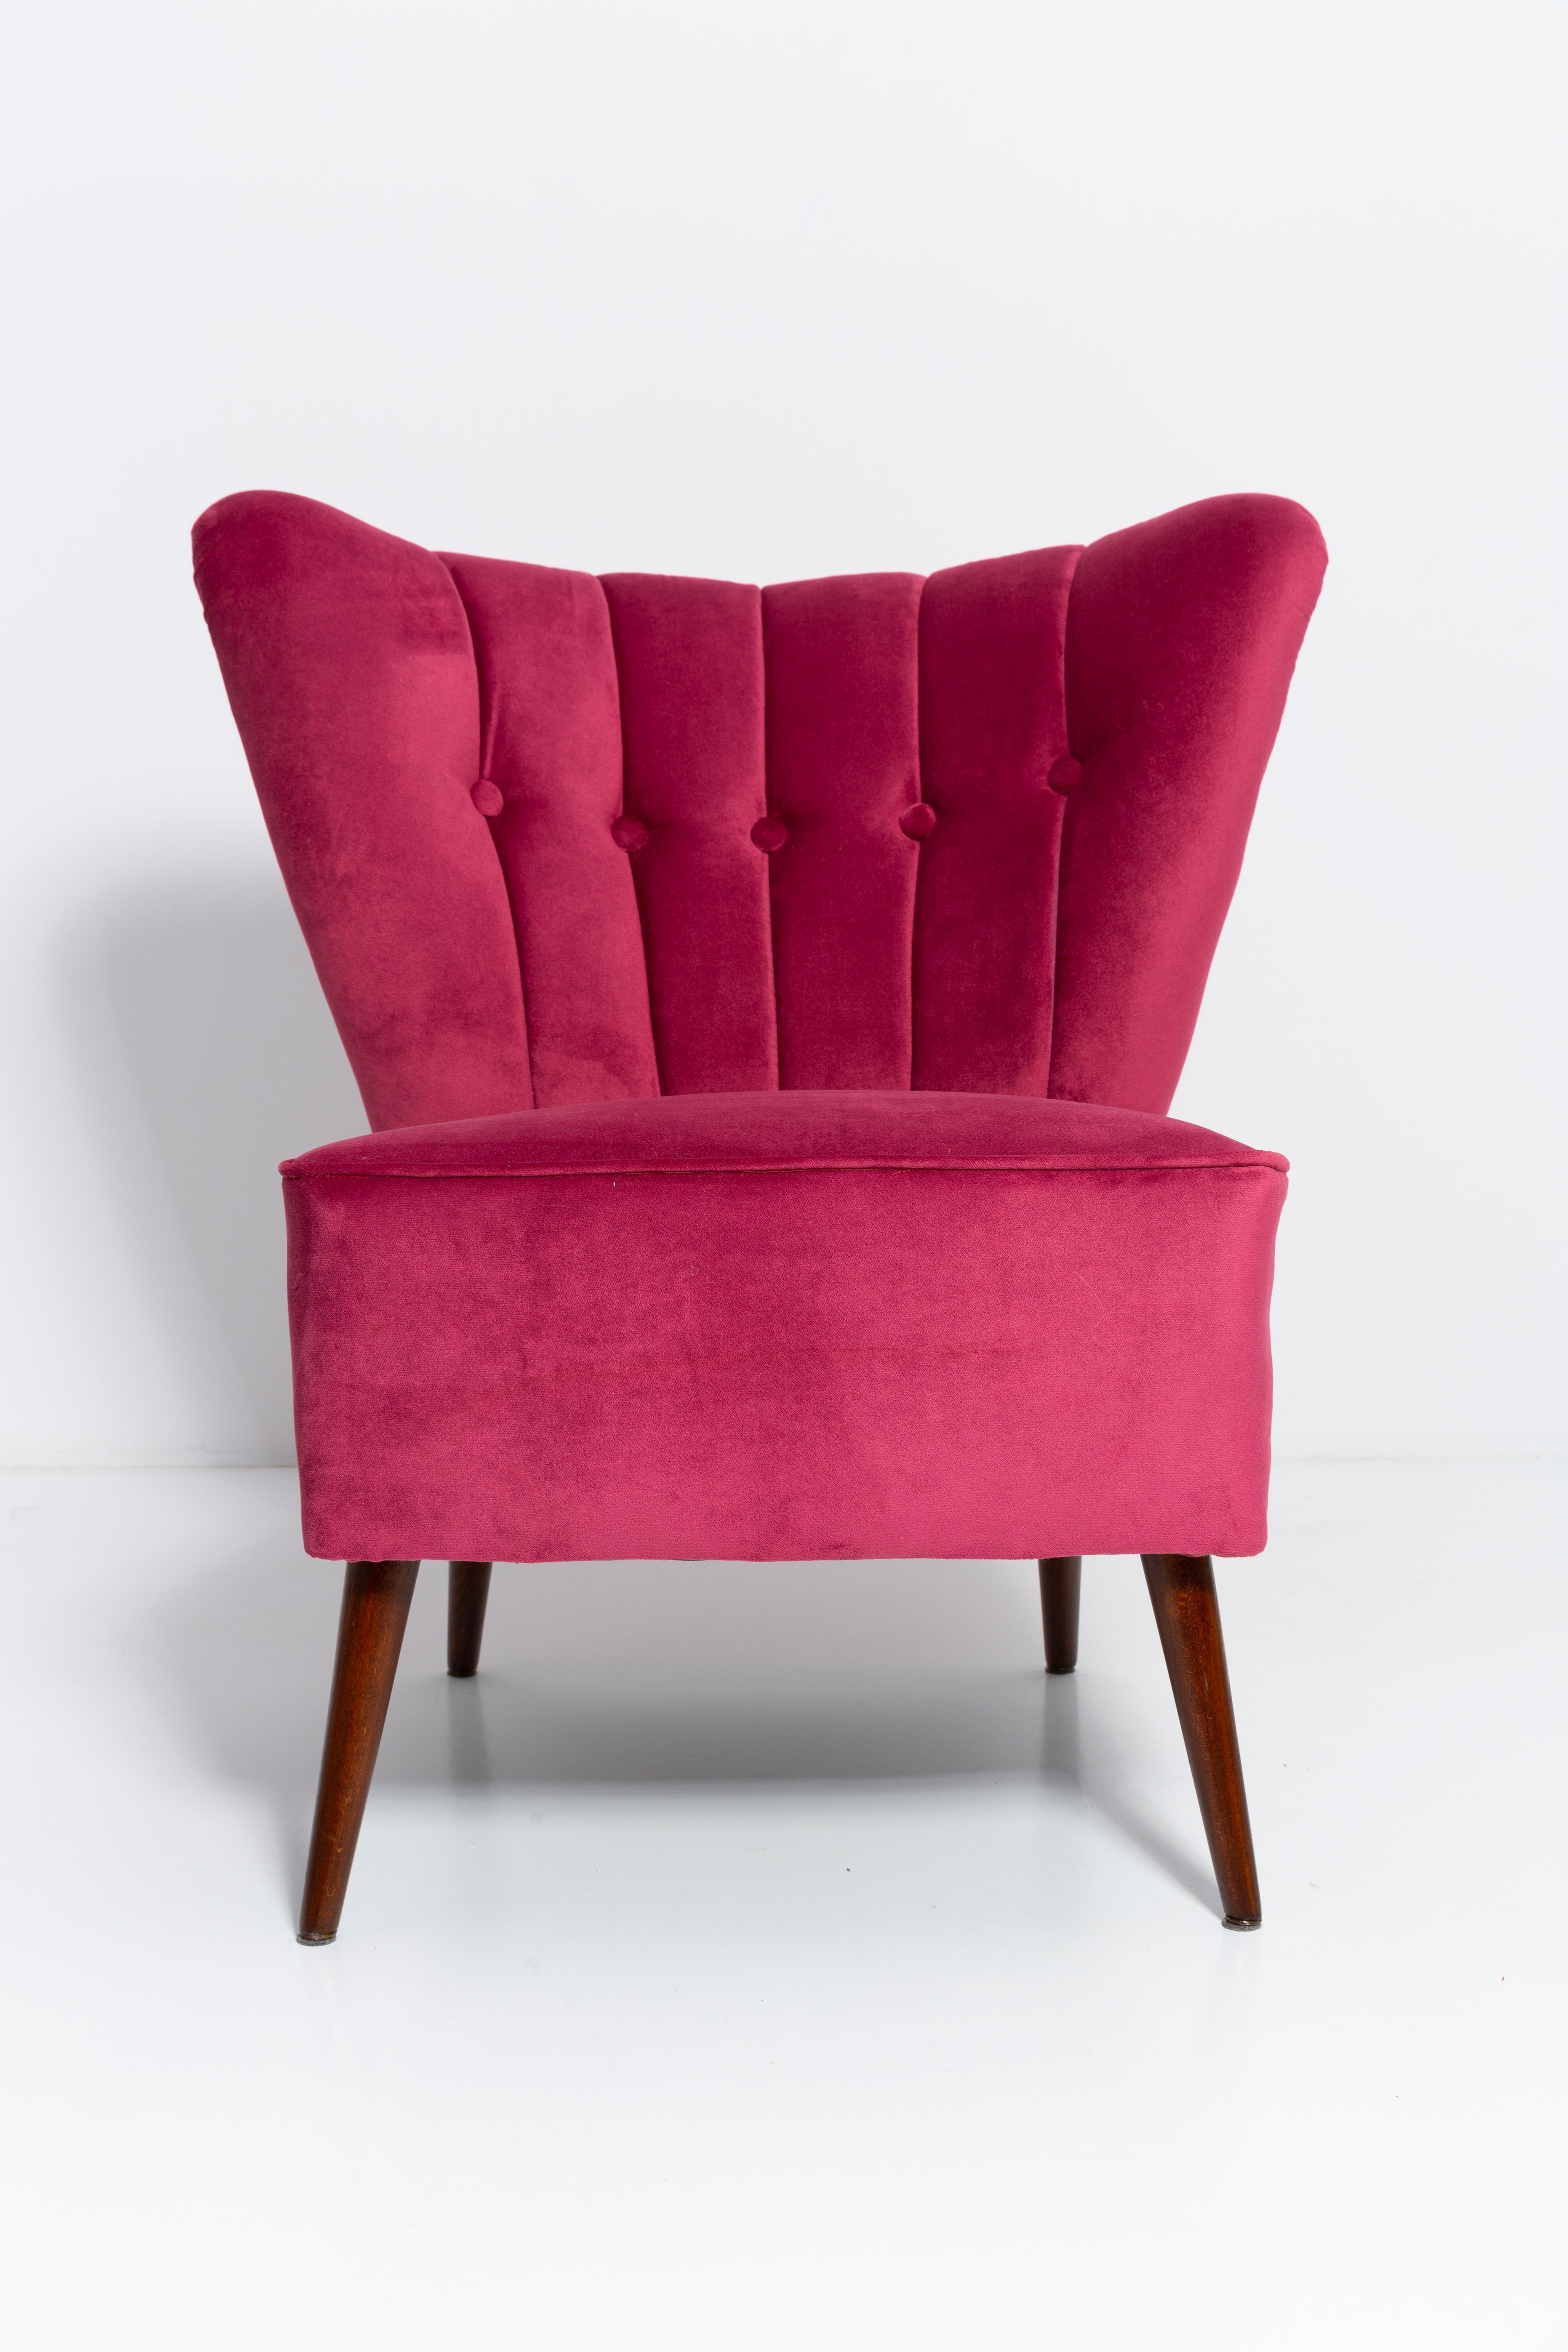 Four Midcentury Magenta Pink Velvet Club Armchairs, Europe, 1960s For Sale 2